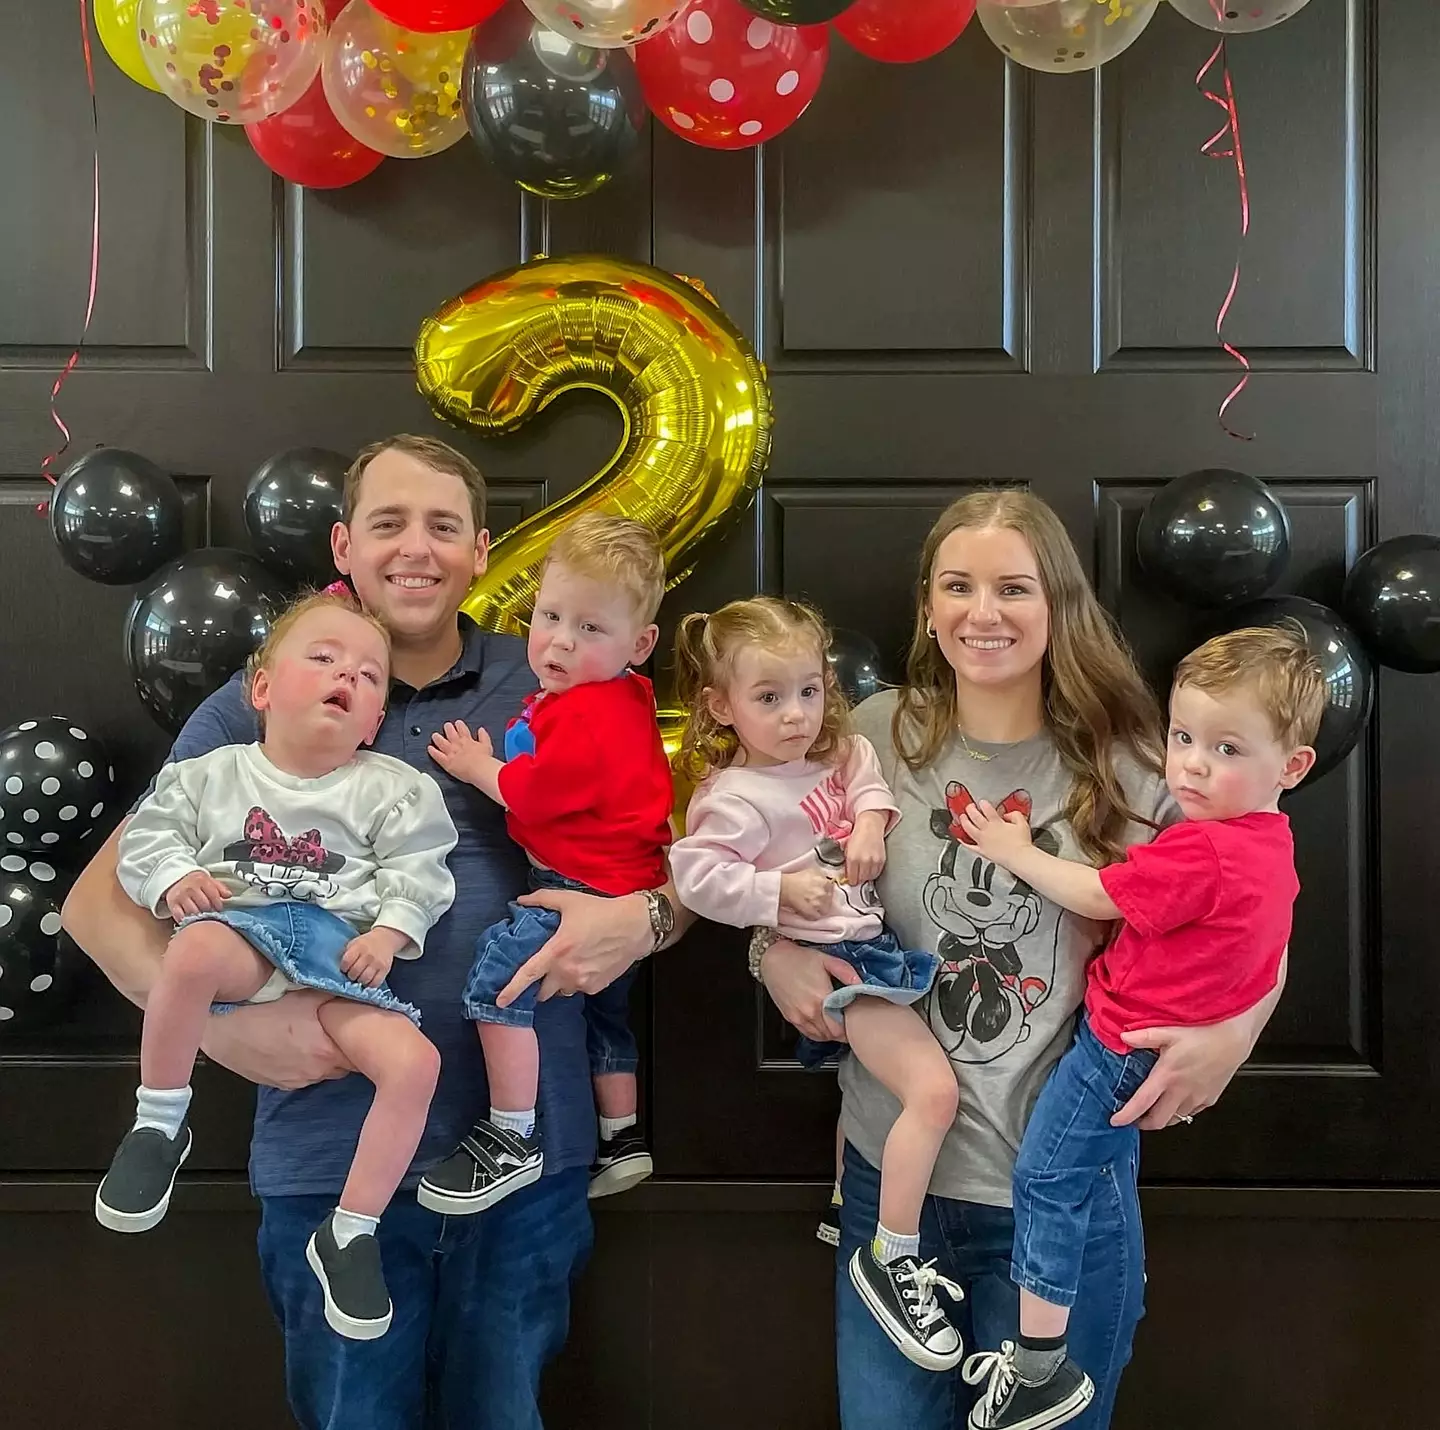 Hannah and Jacob's children celebrated their second birthday earlier this year.